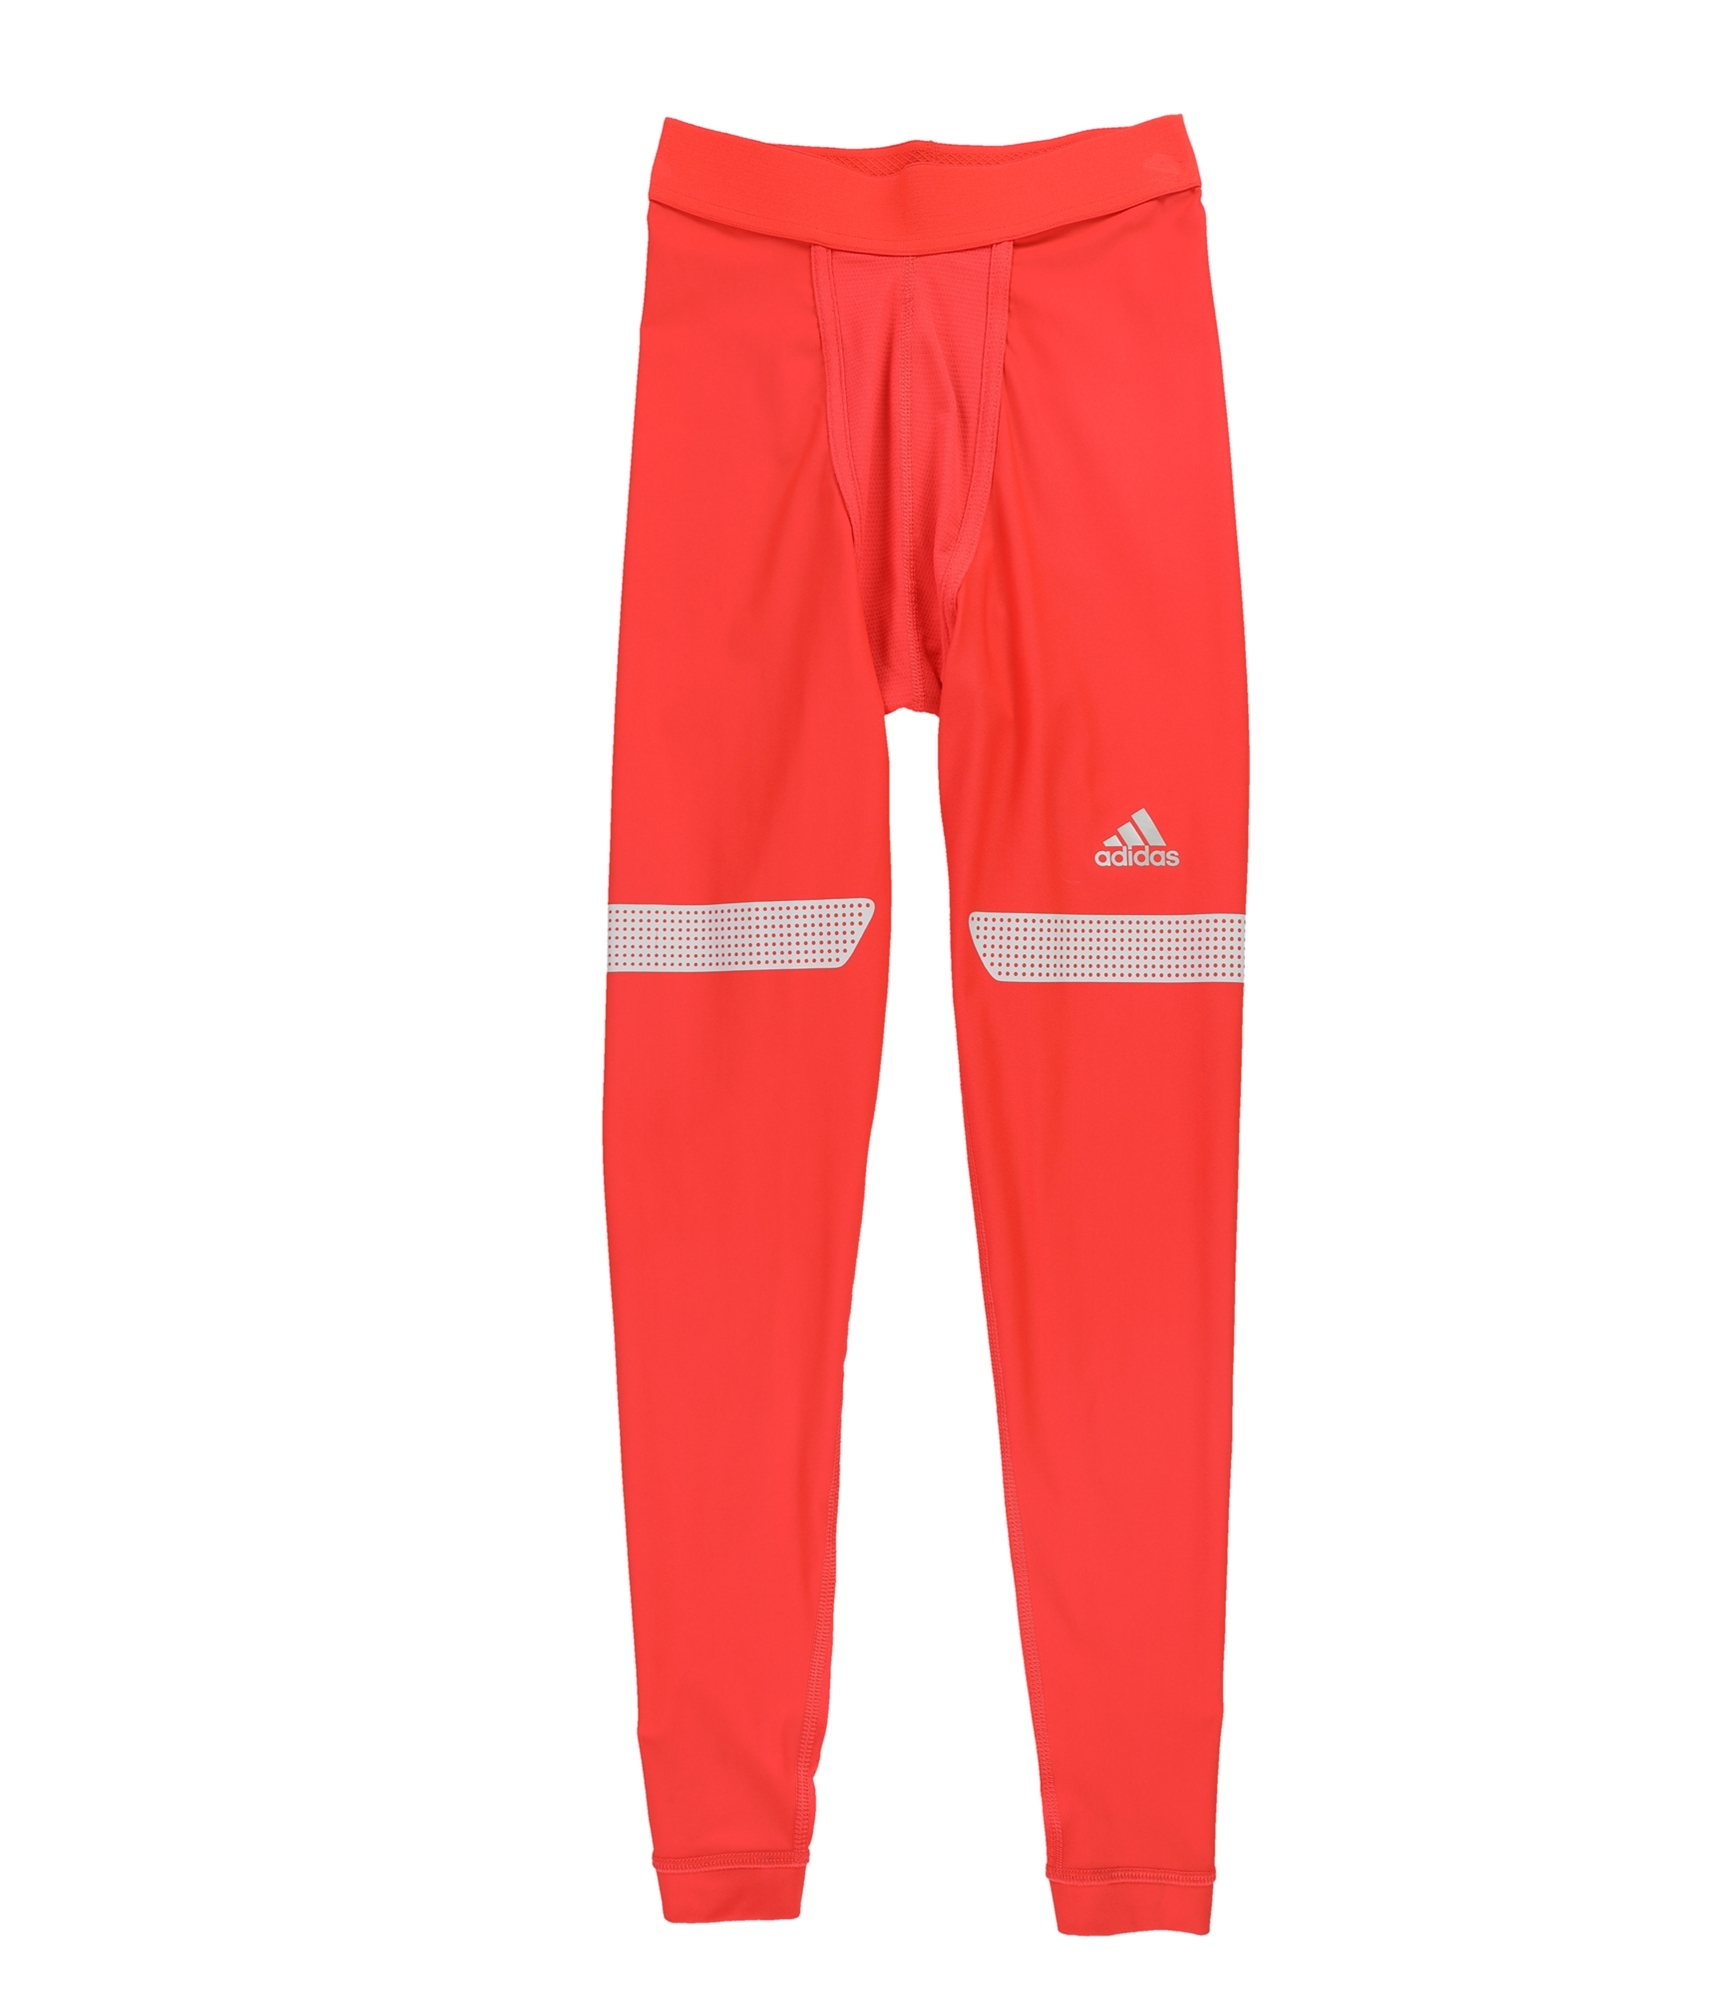 a Mens Adidas Compression Athletic Pants Online TagsWeekly.com